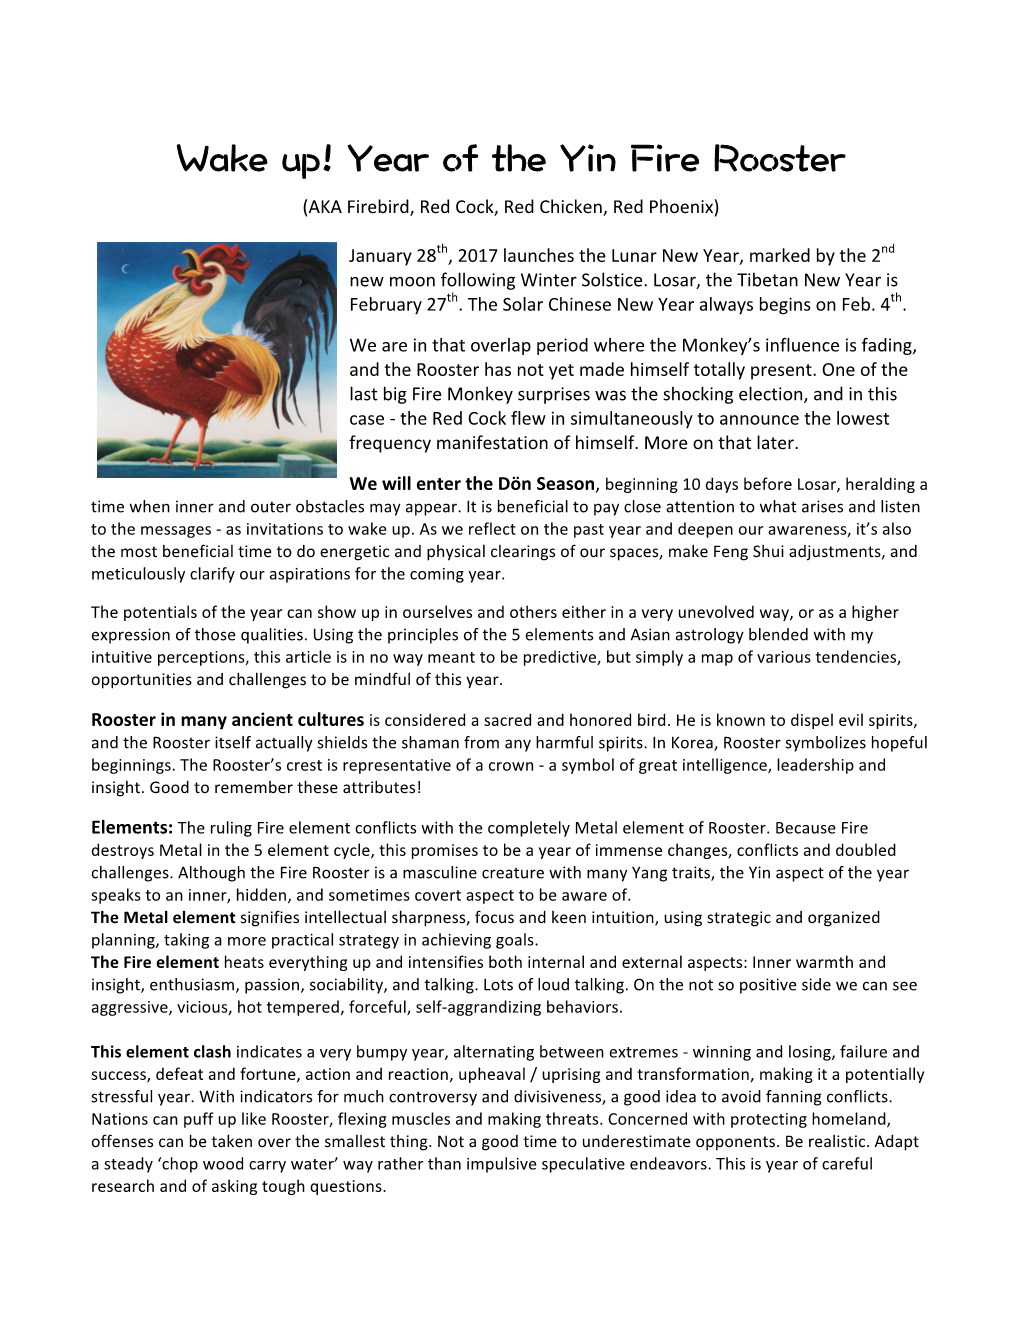 Year of the Yin Fire Rooster